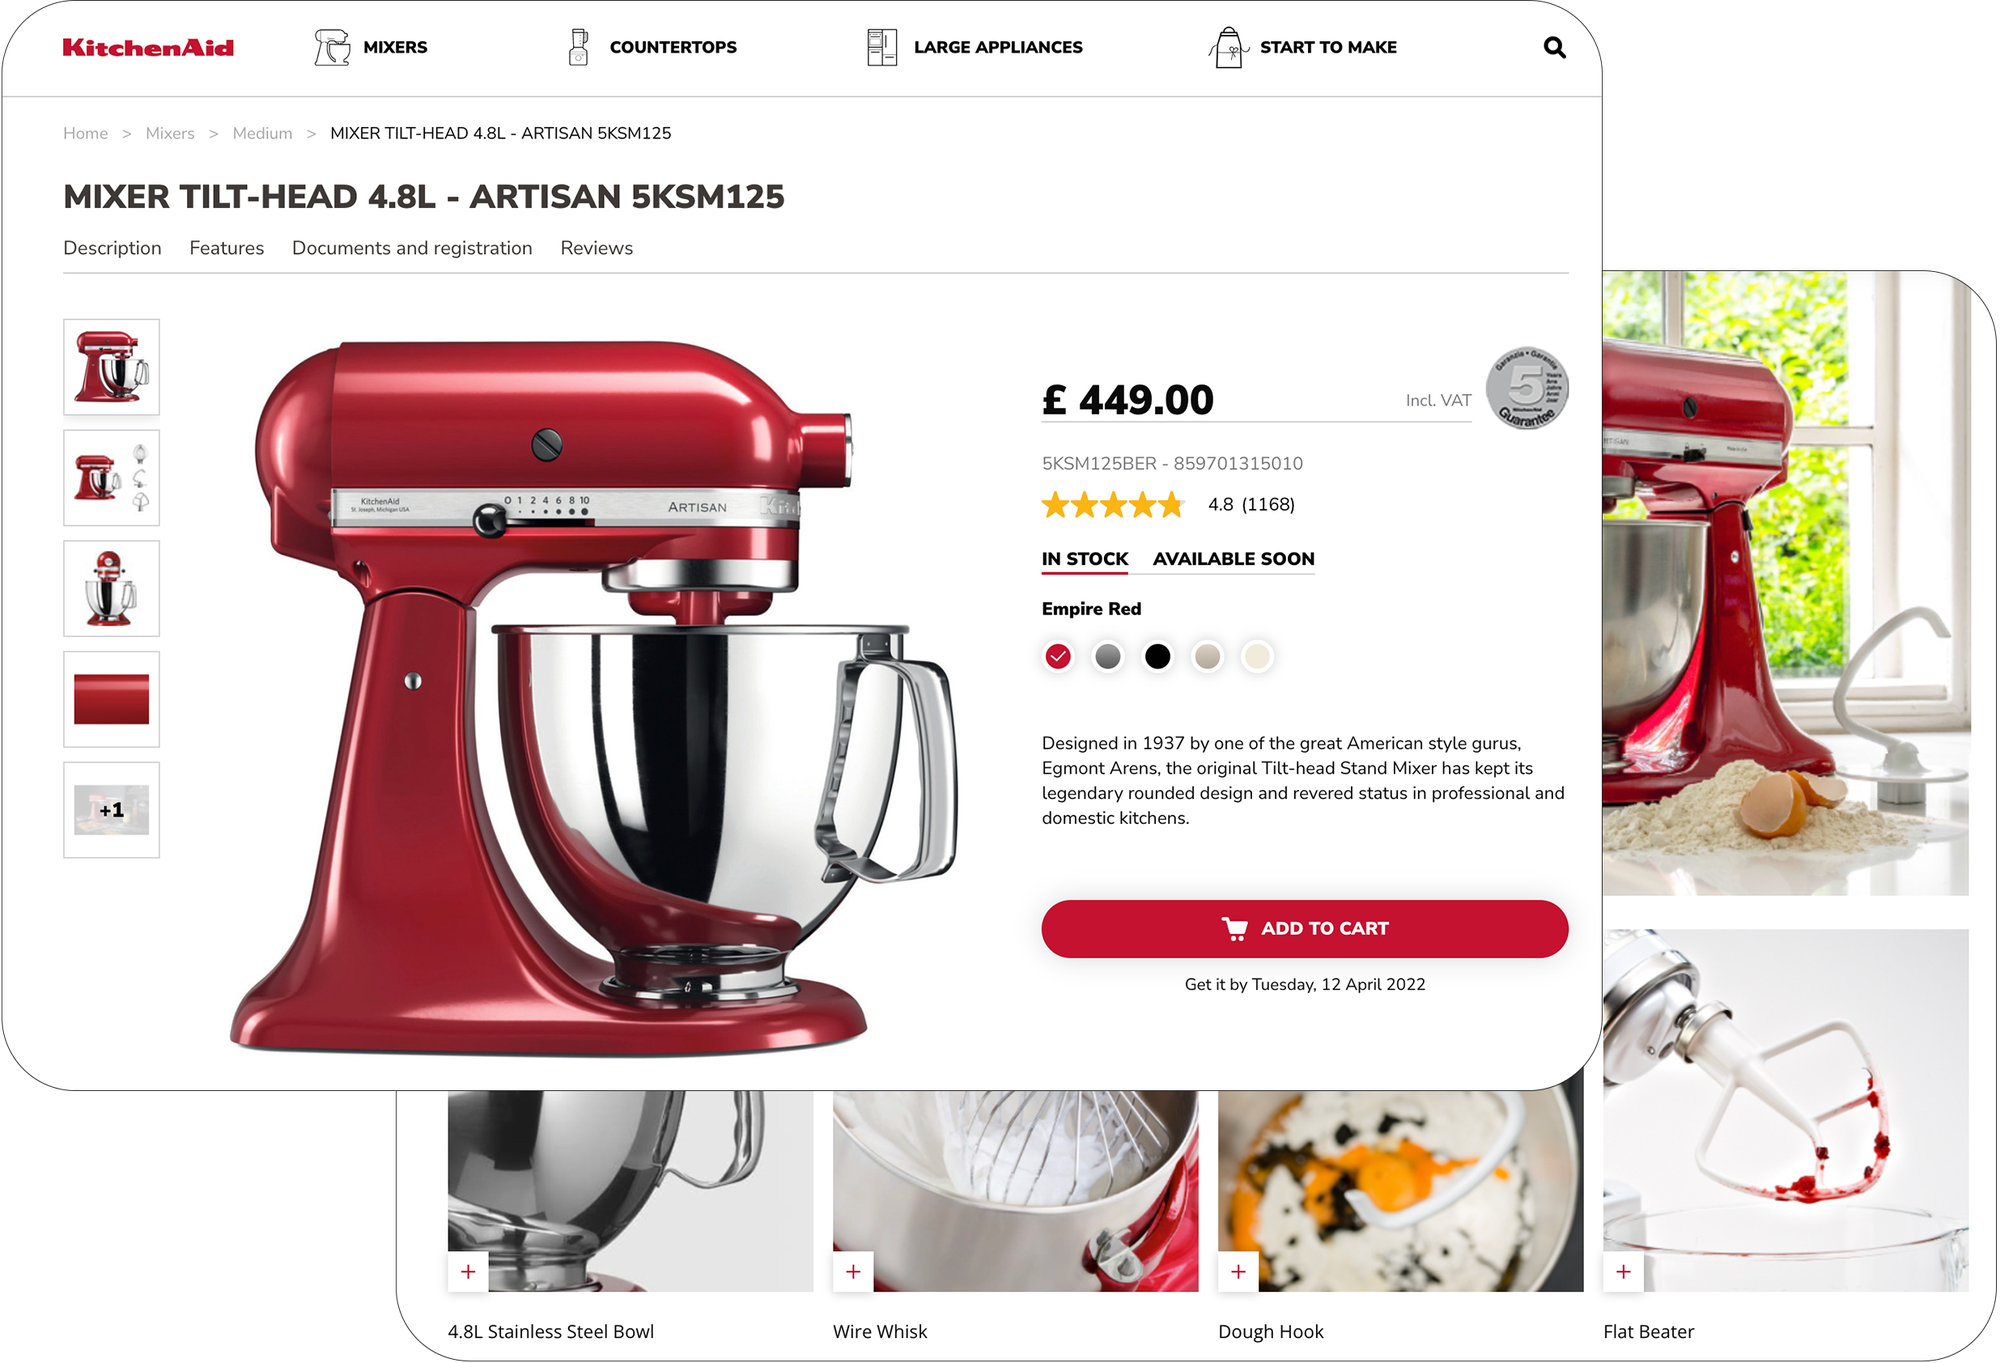 Association of contents and product information in KitchenAid